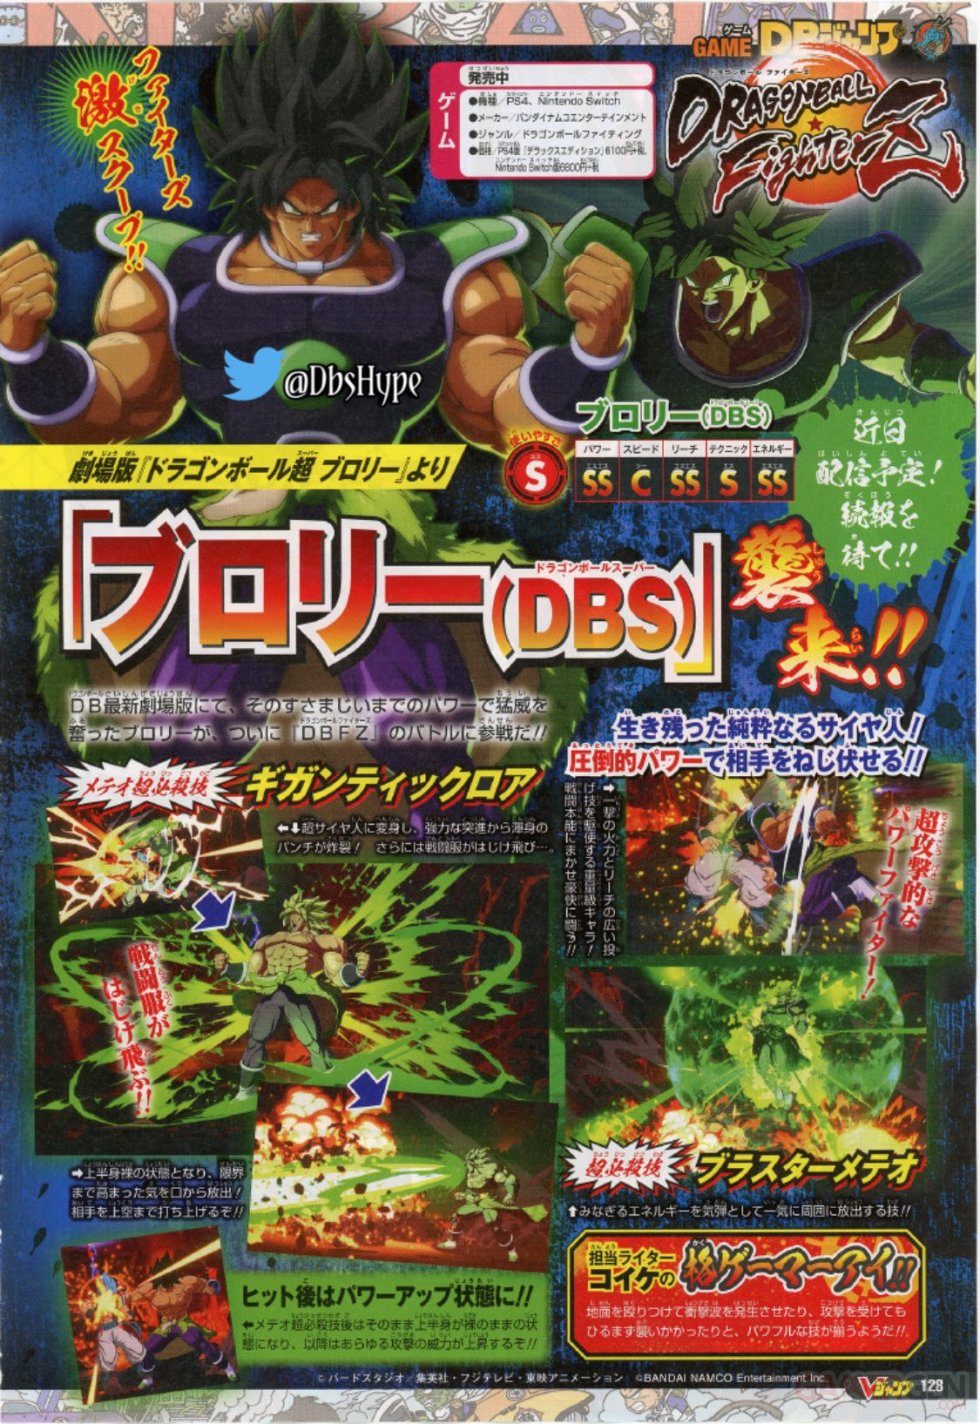 Dragon-Ball-FighterZ-scan-Broly-DBS-19-10-2019